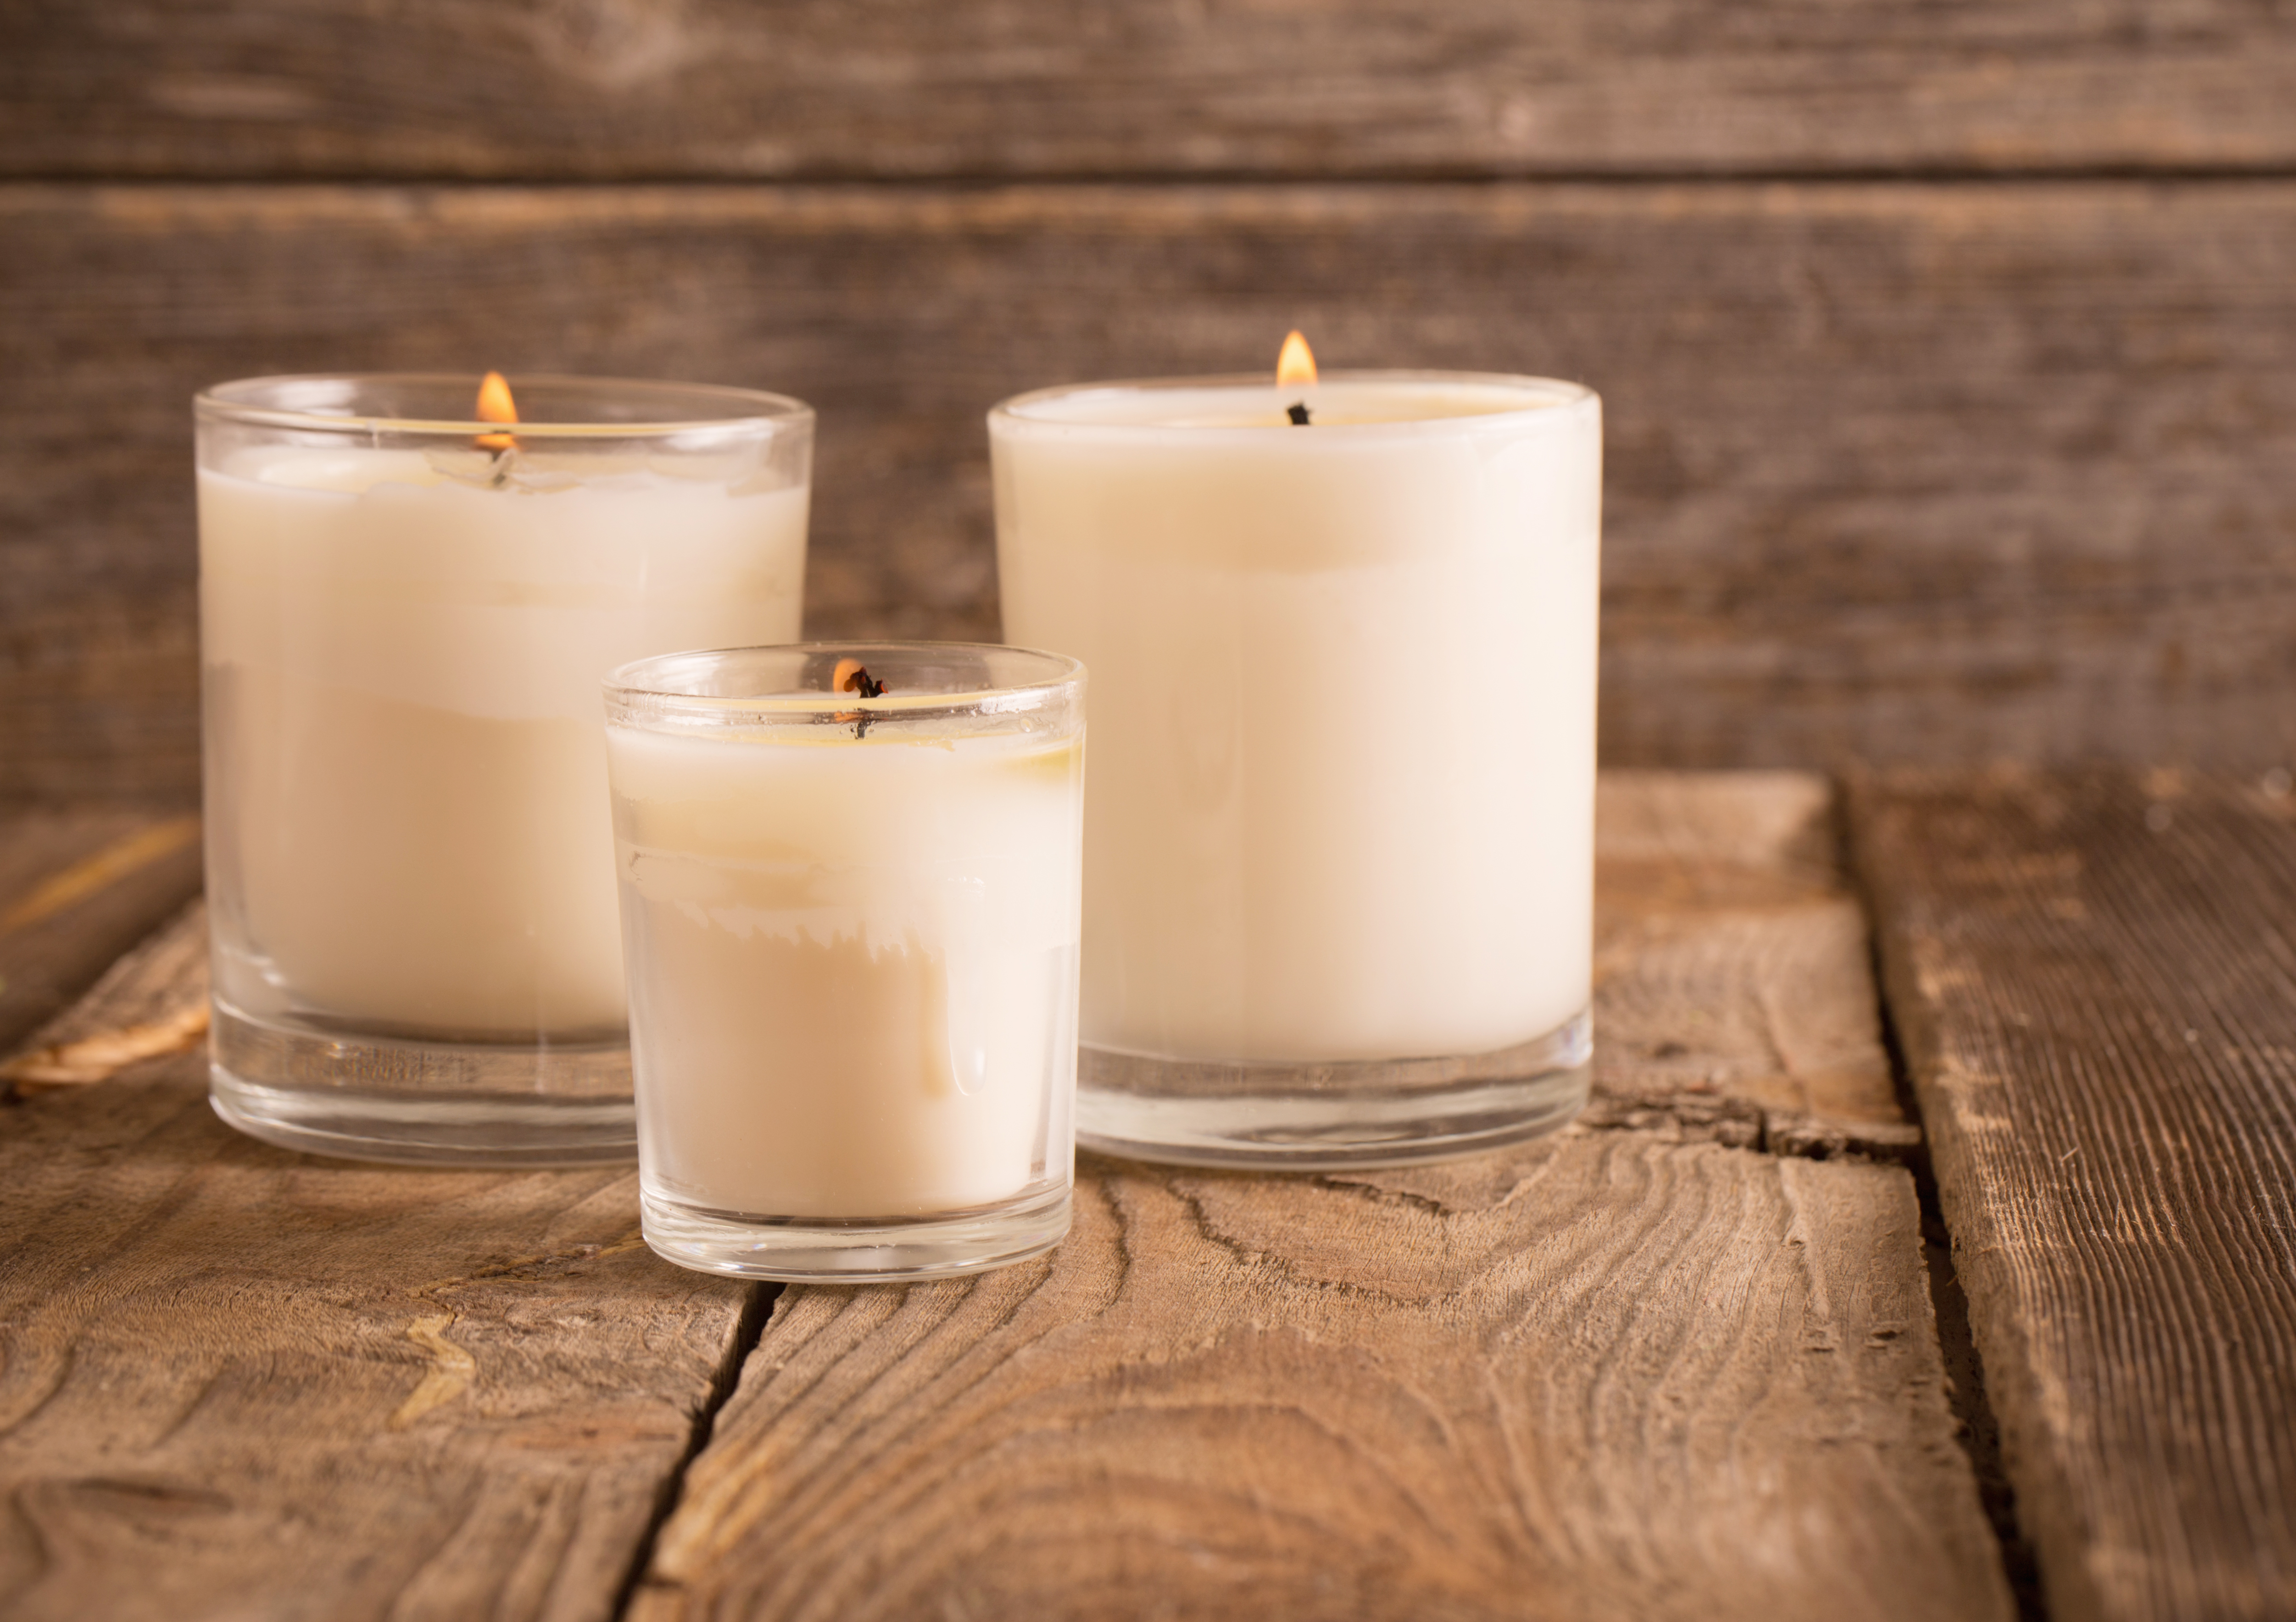 3 candles in glass holders on wooden table